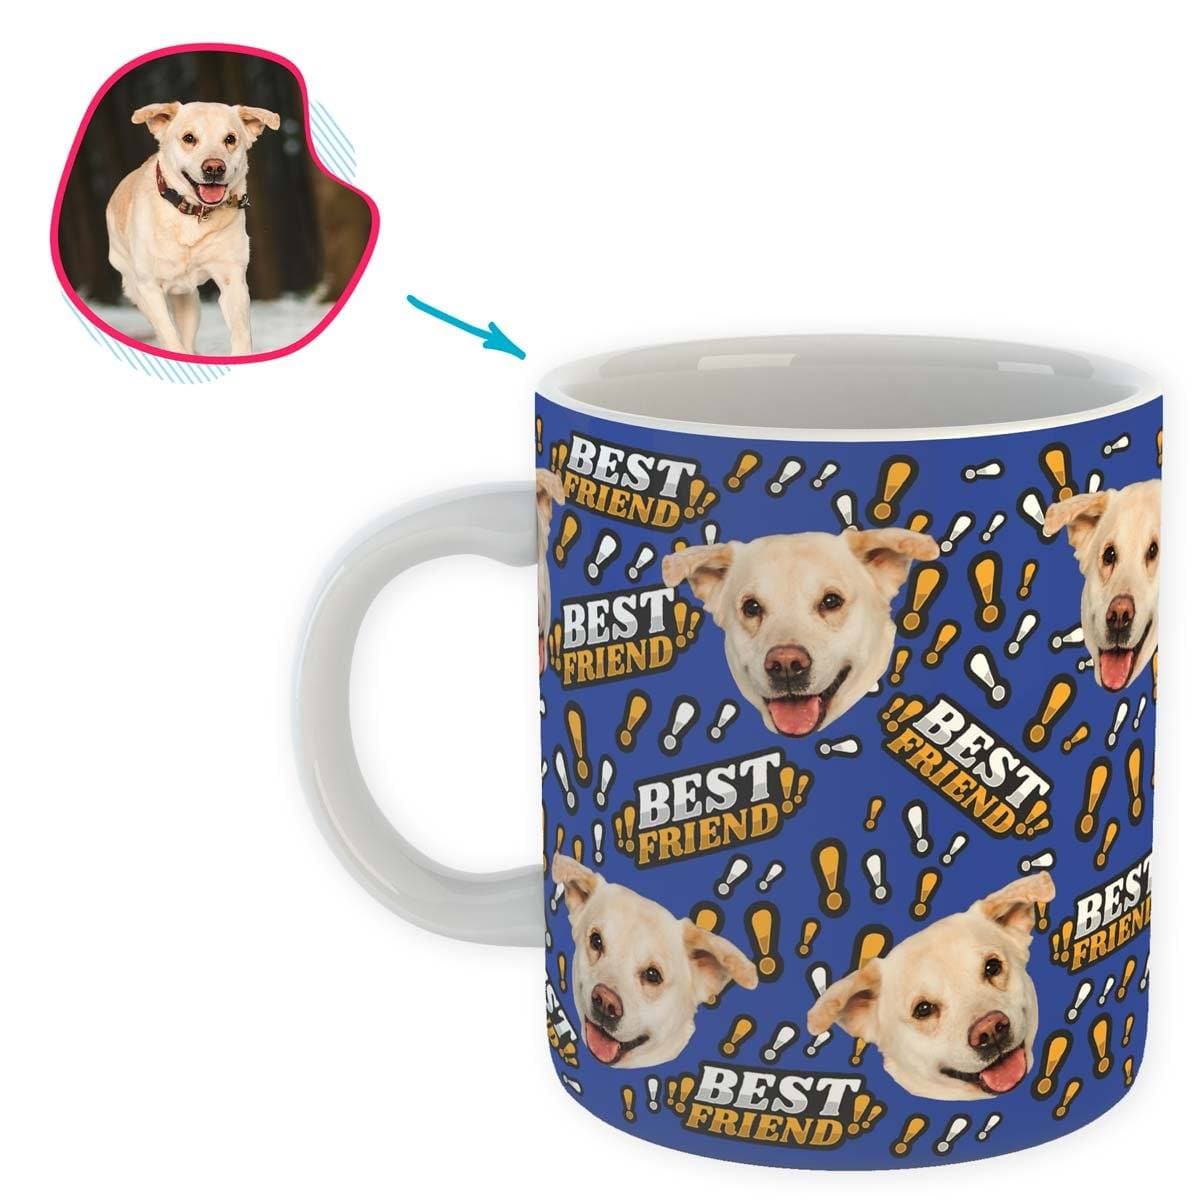 darkblue Best Friend mug personalized with photo of face printed on it